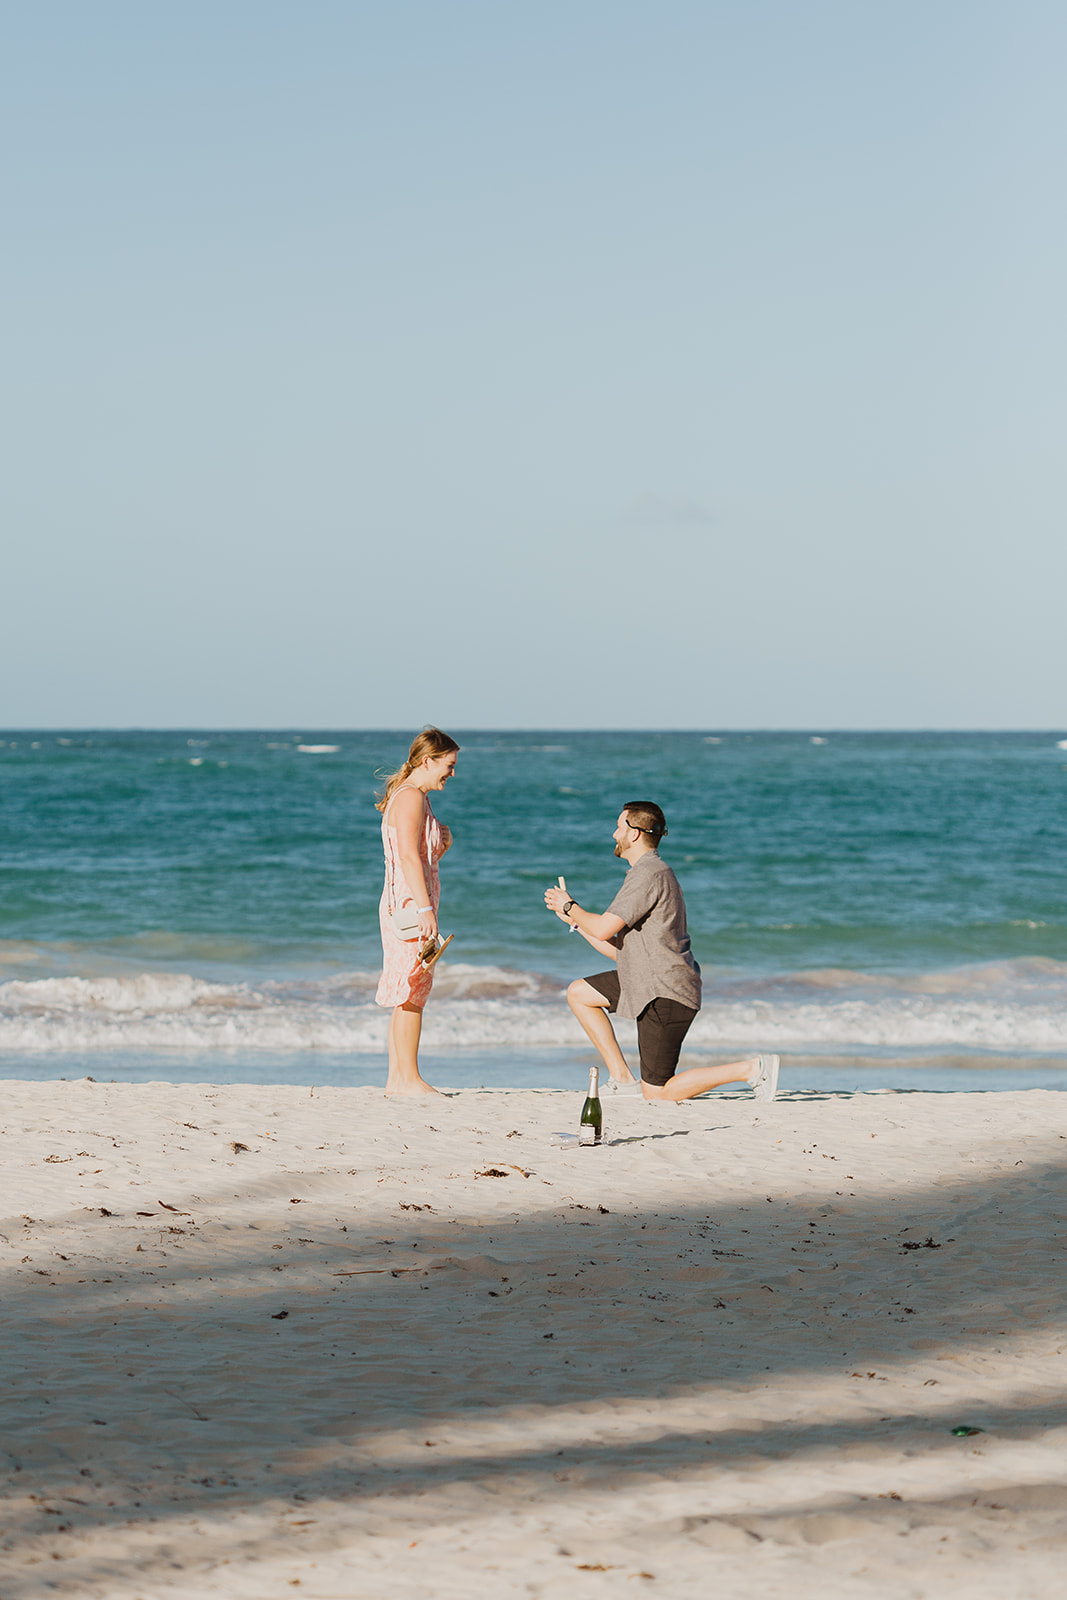 The moment of the proposal on the beach near the surf in Punta Cana Dominican Republic